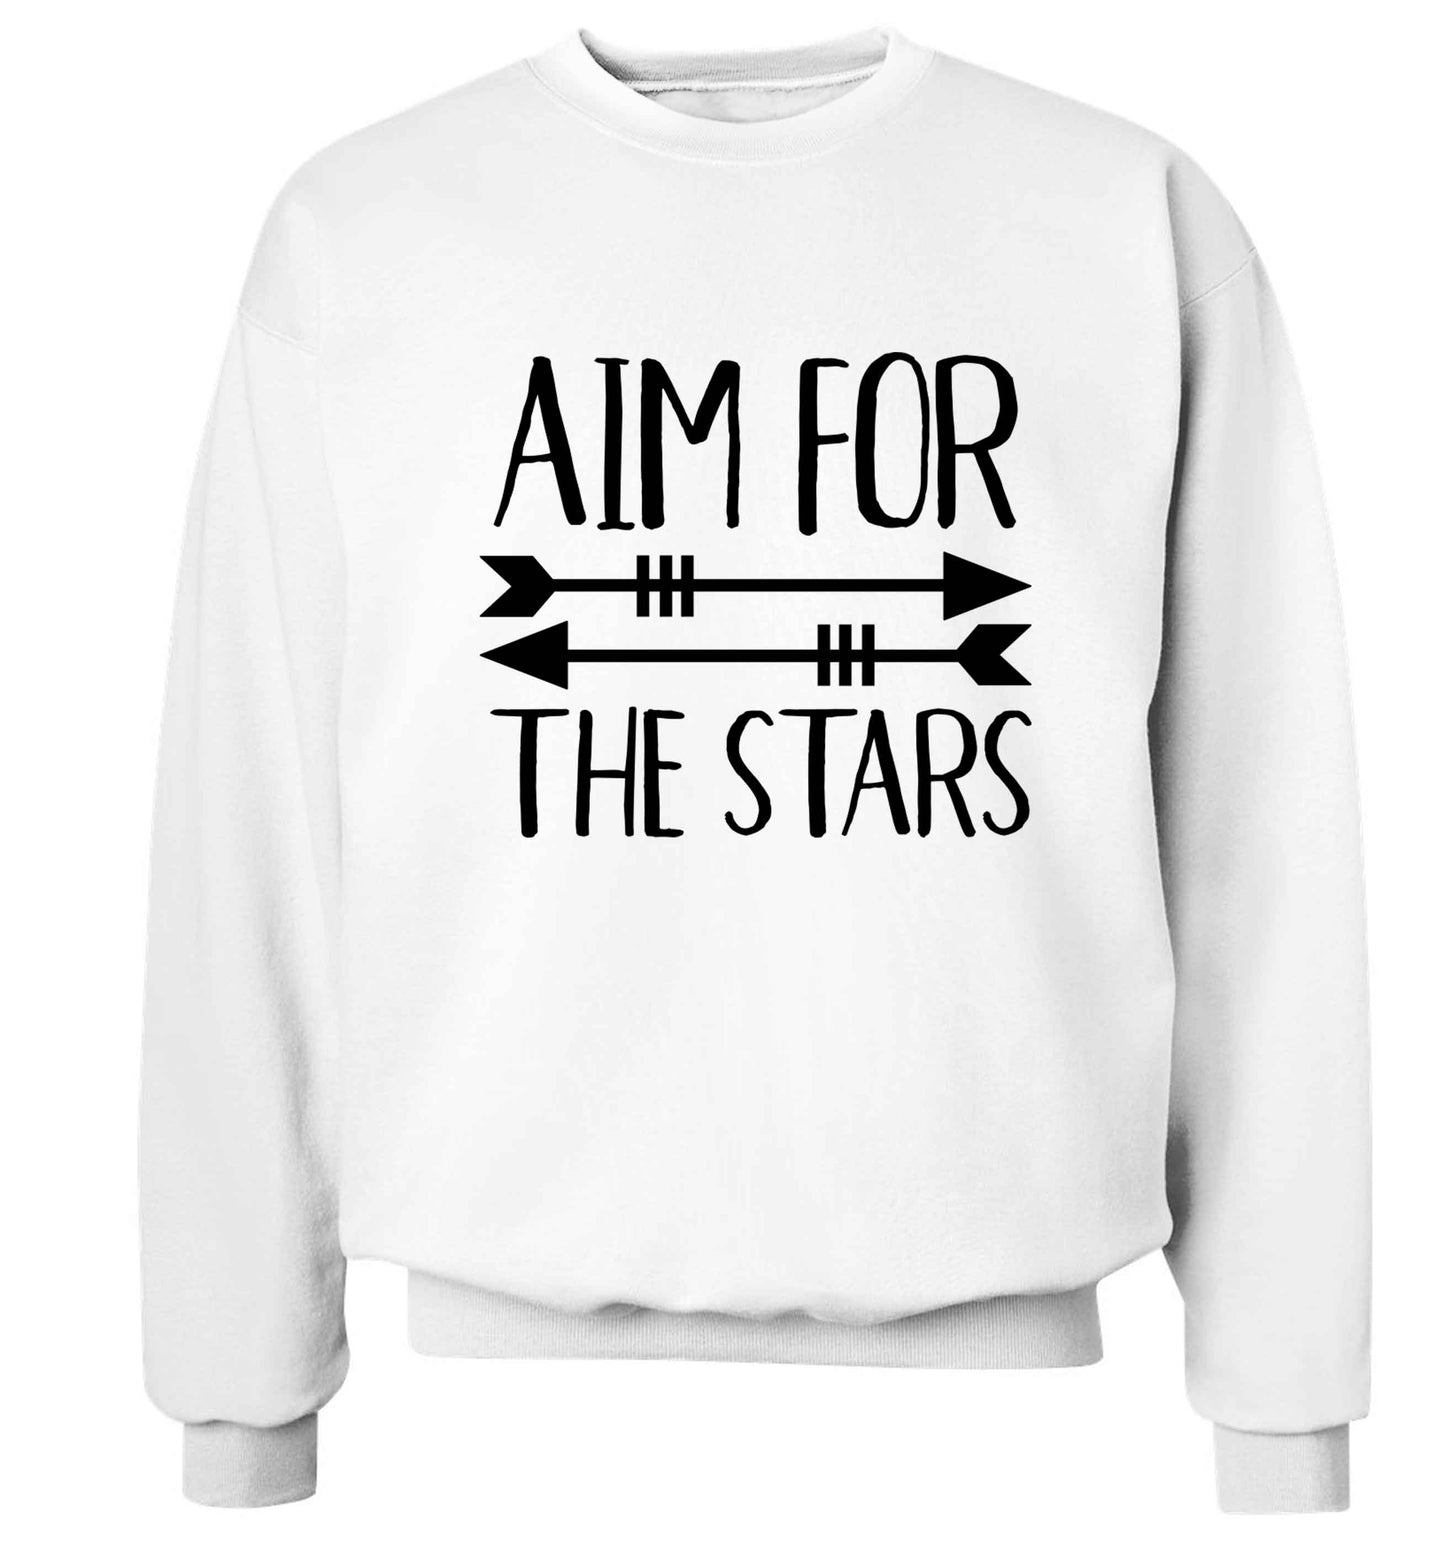 Aim for the stars Adult's unisex white Sweater 2XL